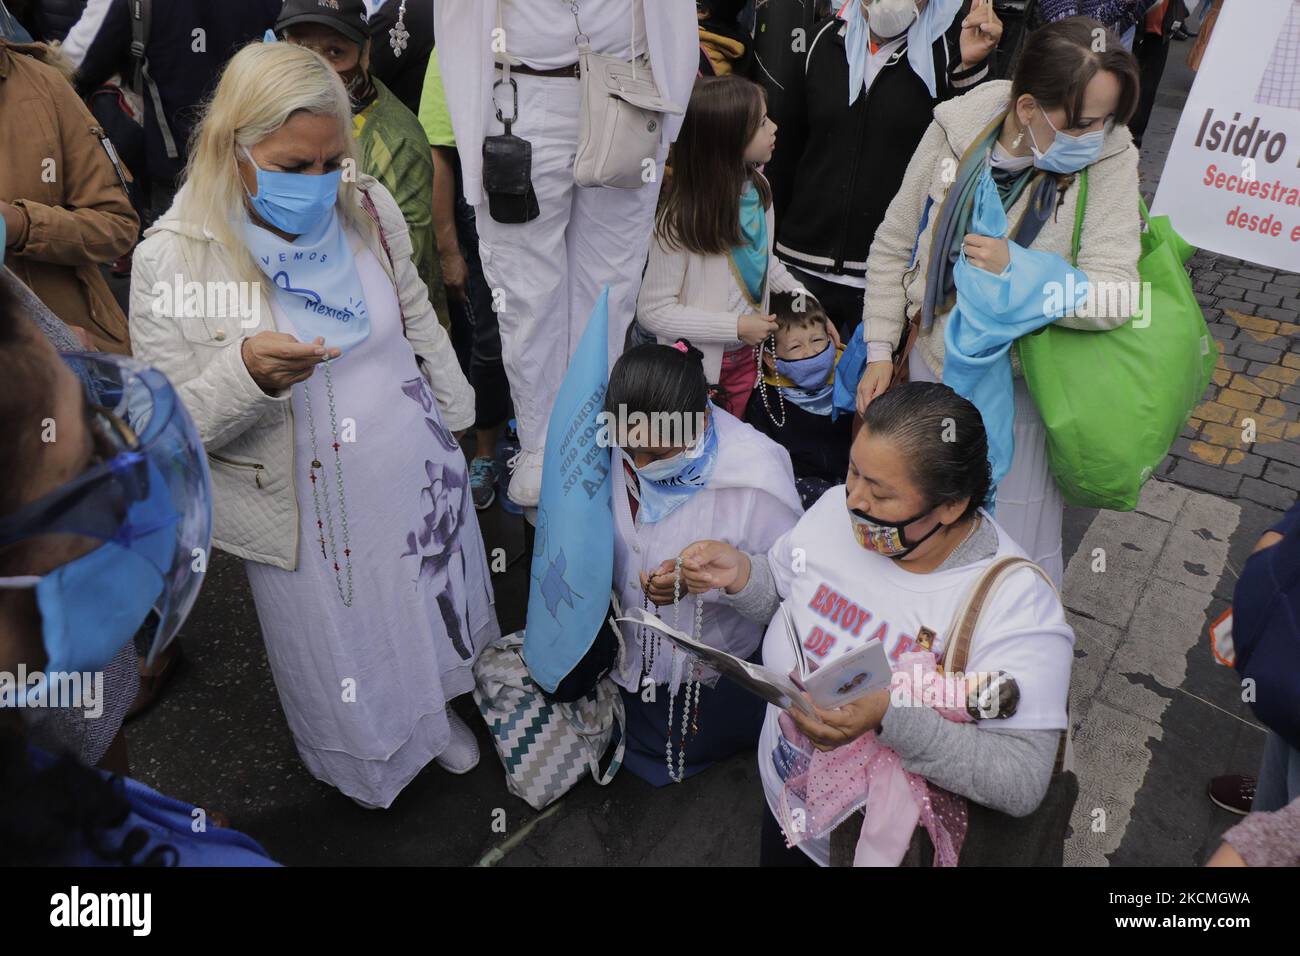 Members of the National Front for the Family pray and demonstrate outside the Supreme Court of Justice in Mexico City against the decriminalisation of abortion after ministers recently voted unanimously in favour in plenary during the COVID-19 health emergency, following a historic decision. (Photo by Gerardo Vieyra/NurPhoto) Stock Photo